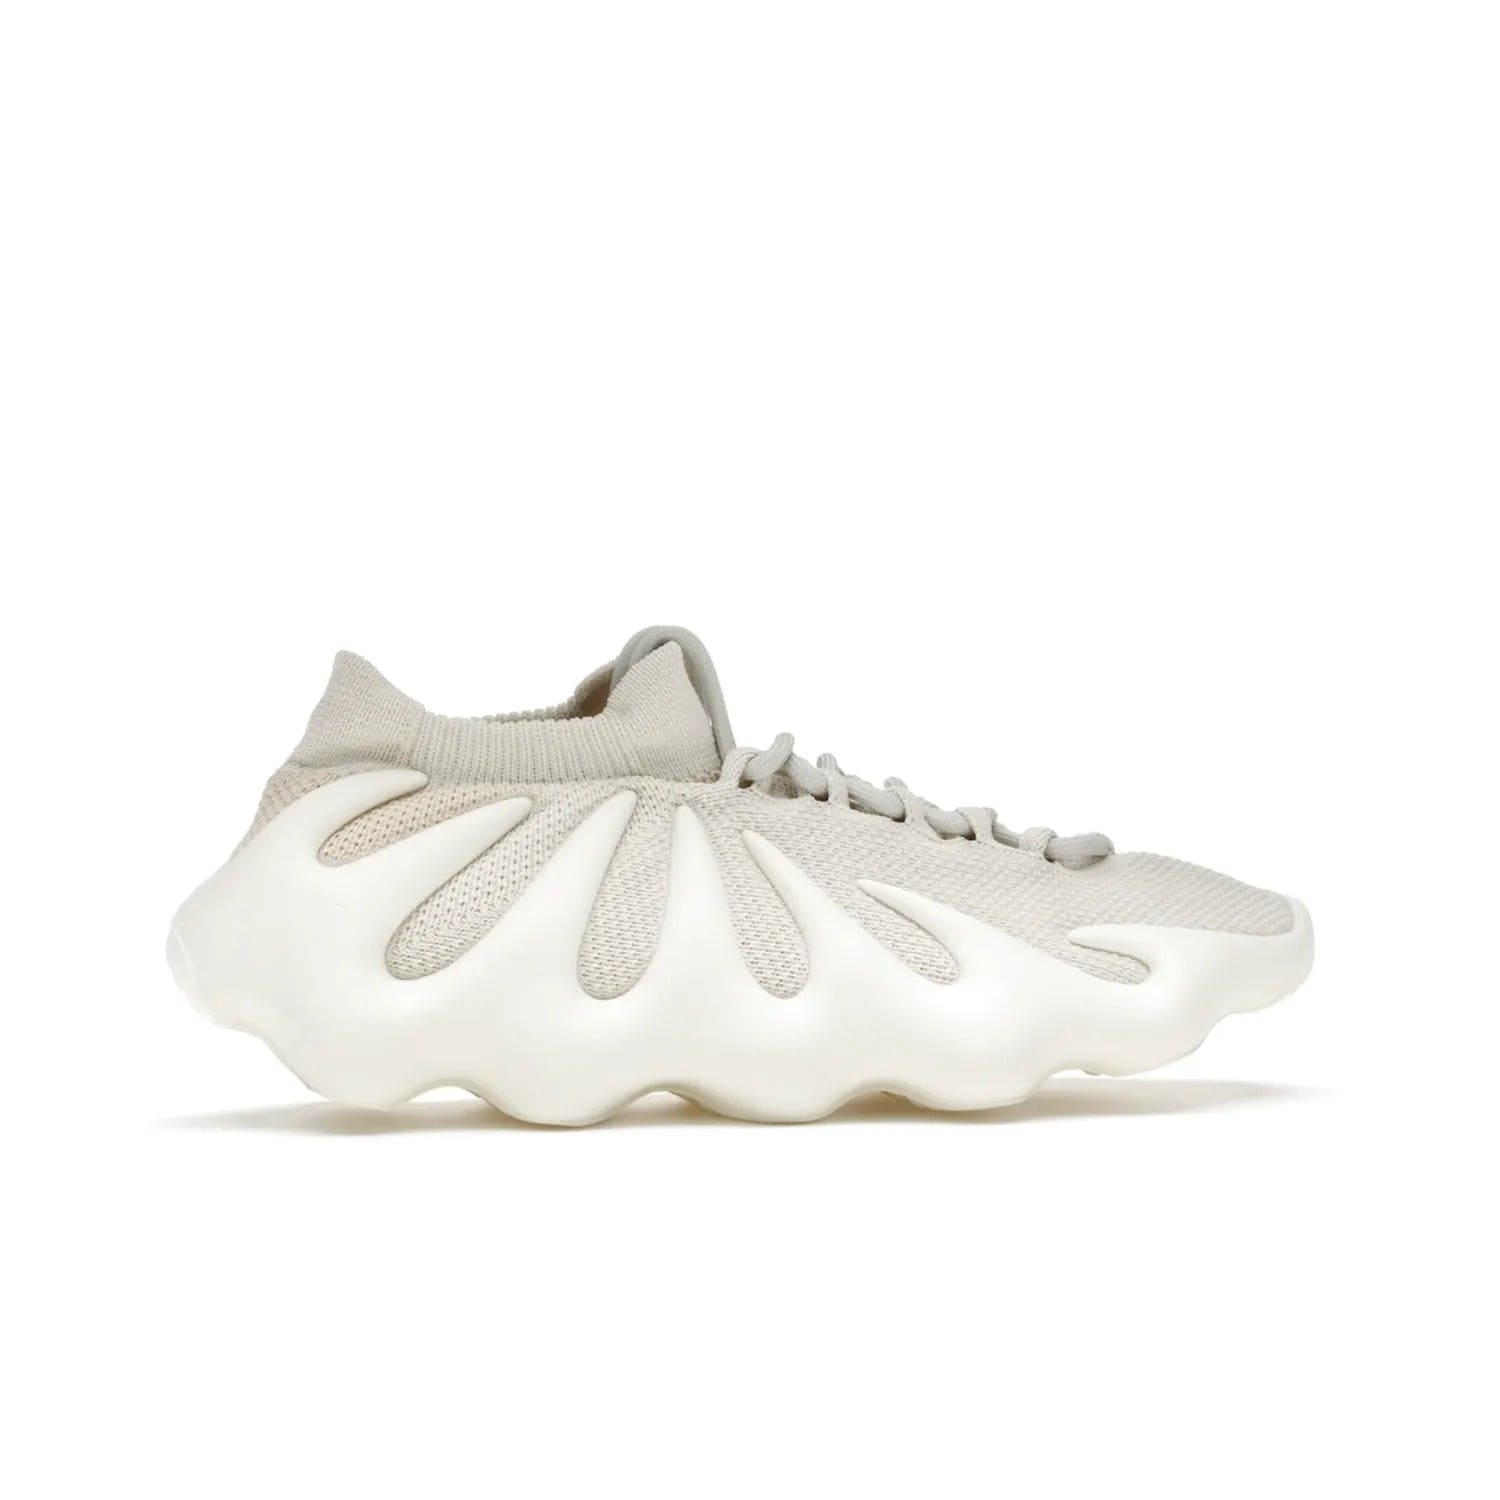 adidas Yeezy 450 Cloud White - Image 36 - Only at www.BallersClubKickz.com - Experience the future with the adidas Yeezy 450 Cloud White. A two-piece design featuring an extreme foam sole and mesh upper, this silhouette is expected to release in March 2021. Get your hands on this striking Cloud White/Cloud White colorway and stand out in the crowd.